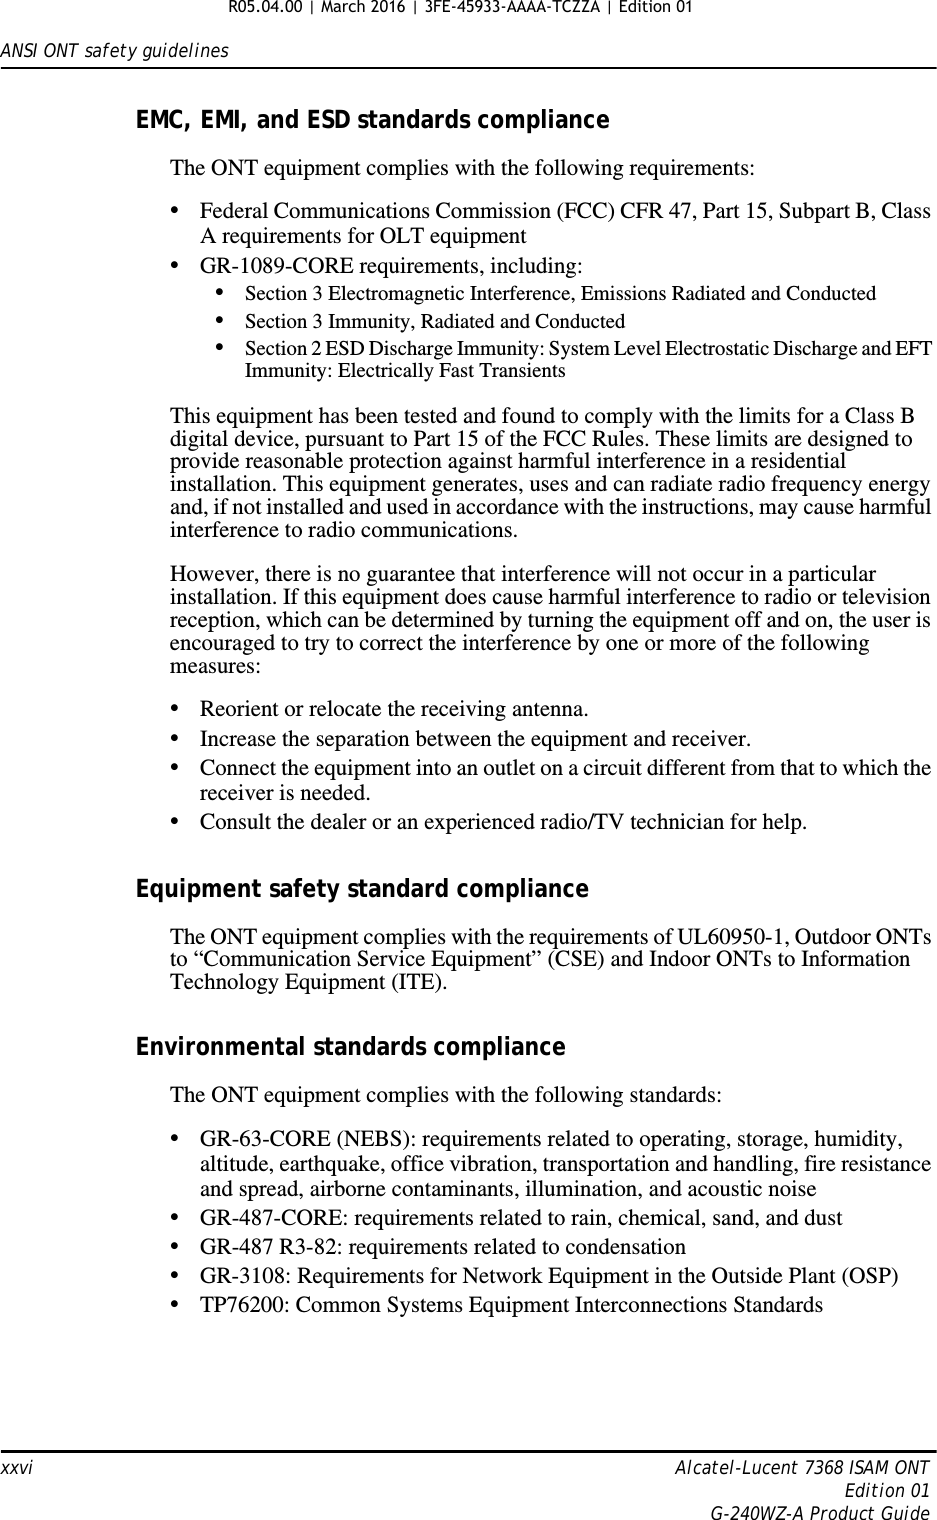 ANSI ONT safety guidelinesxxvi Alcatel-Lucent 7368 ISAM ONTEdition 01G-240WZ-A Product GuideEMC, EMI, and ESD standards complianceThe ONT equipment complies with the following requirements:•Federal Communications Commission (FCC) CFR 47, Part 15, Subpart B, Class A requirements for OLT equipment•GR-1089-CORE requirements, including:•Section 3 Electromagnetic Interference, Emissions Radiated and Conducted•Section 3 Immunity, Radiated and Conducted•Section 2 ESD Discharge Immunity: System Level Electrostatic Discharge and EFT Immunity: Electrically Fast TransientsThis equipment has been tested and found to comply with the limits for a Class B digital device, pursuant to Part 15 of the FCC Rules. These limits are designed to provide reasonable protection against harmful interference in a residential installation. This equipment generates, uses and can radiate radio frequency energy and, if not installed and used in accordance with the instructions, may cause harmful interference to radio communications.However, there is no guarantee that interference will not occur in a particular installation. If this equipment does cause harmful interference to radio or television reception, which can be determined by turning the equipment off and on, the user is encouraged to try to correct the interference by one or more of the following measures:•Reorient or relocate the receiving antenna.•Increase the separation between the equipment and receiver.•Connect the equipment into an outlet on a circuit different from that to which the receiver is needed.•Consult the dealer or an experienced radio/TV technician for help.Equipment safety standard complianceThe ONT equipment complies with the requirements of UL60950-1, Outdoor ONTs to “Communication Service Equipment” (CSE) and Indoor ONTs to Information Technology Equipment (ITE).Environmental standards complianceThe ONT equipment complies with the following standards:•GR-63-CORE (NEBS): requirements related to operating, storage, humidity, altitude, earthquake, office vibration, transportation and handling, fire resistance and spread, airborne contaminants, illumination, and acoustic noise•GR-487-CORE: requirements related to rain, chemical, sand, and dust•GR-487 R3-82: requirements related to condensation •GR-3108: Requirements for Network Equipment in the Outside Plant (OSP)•TP76200: Common Systems Equipment Interconnections StandardsR05.04.00 | March 2016 | 3FE-45933-AAAA-TCZZA | Edition 01 